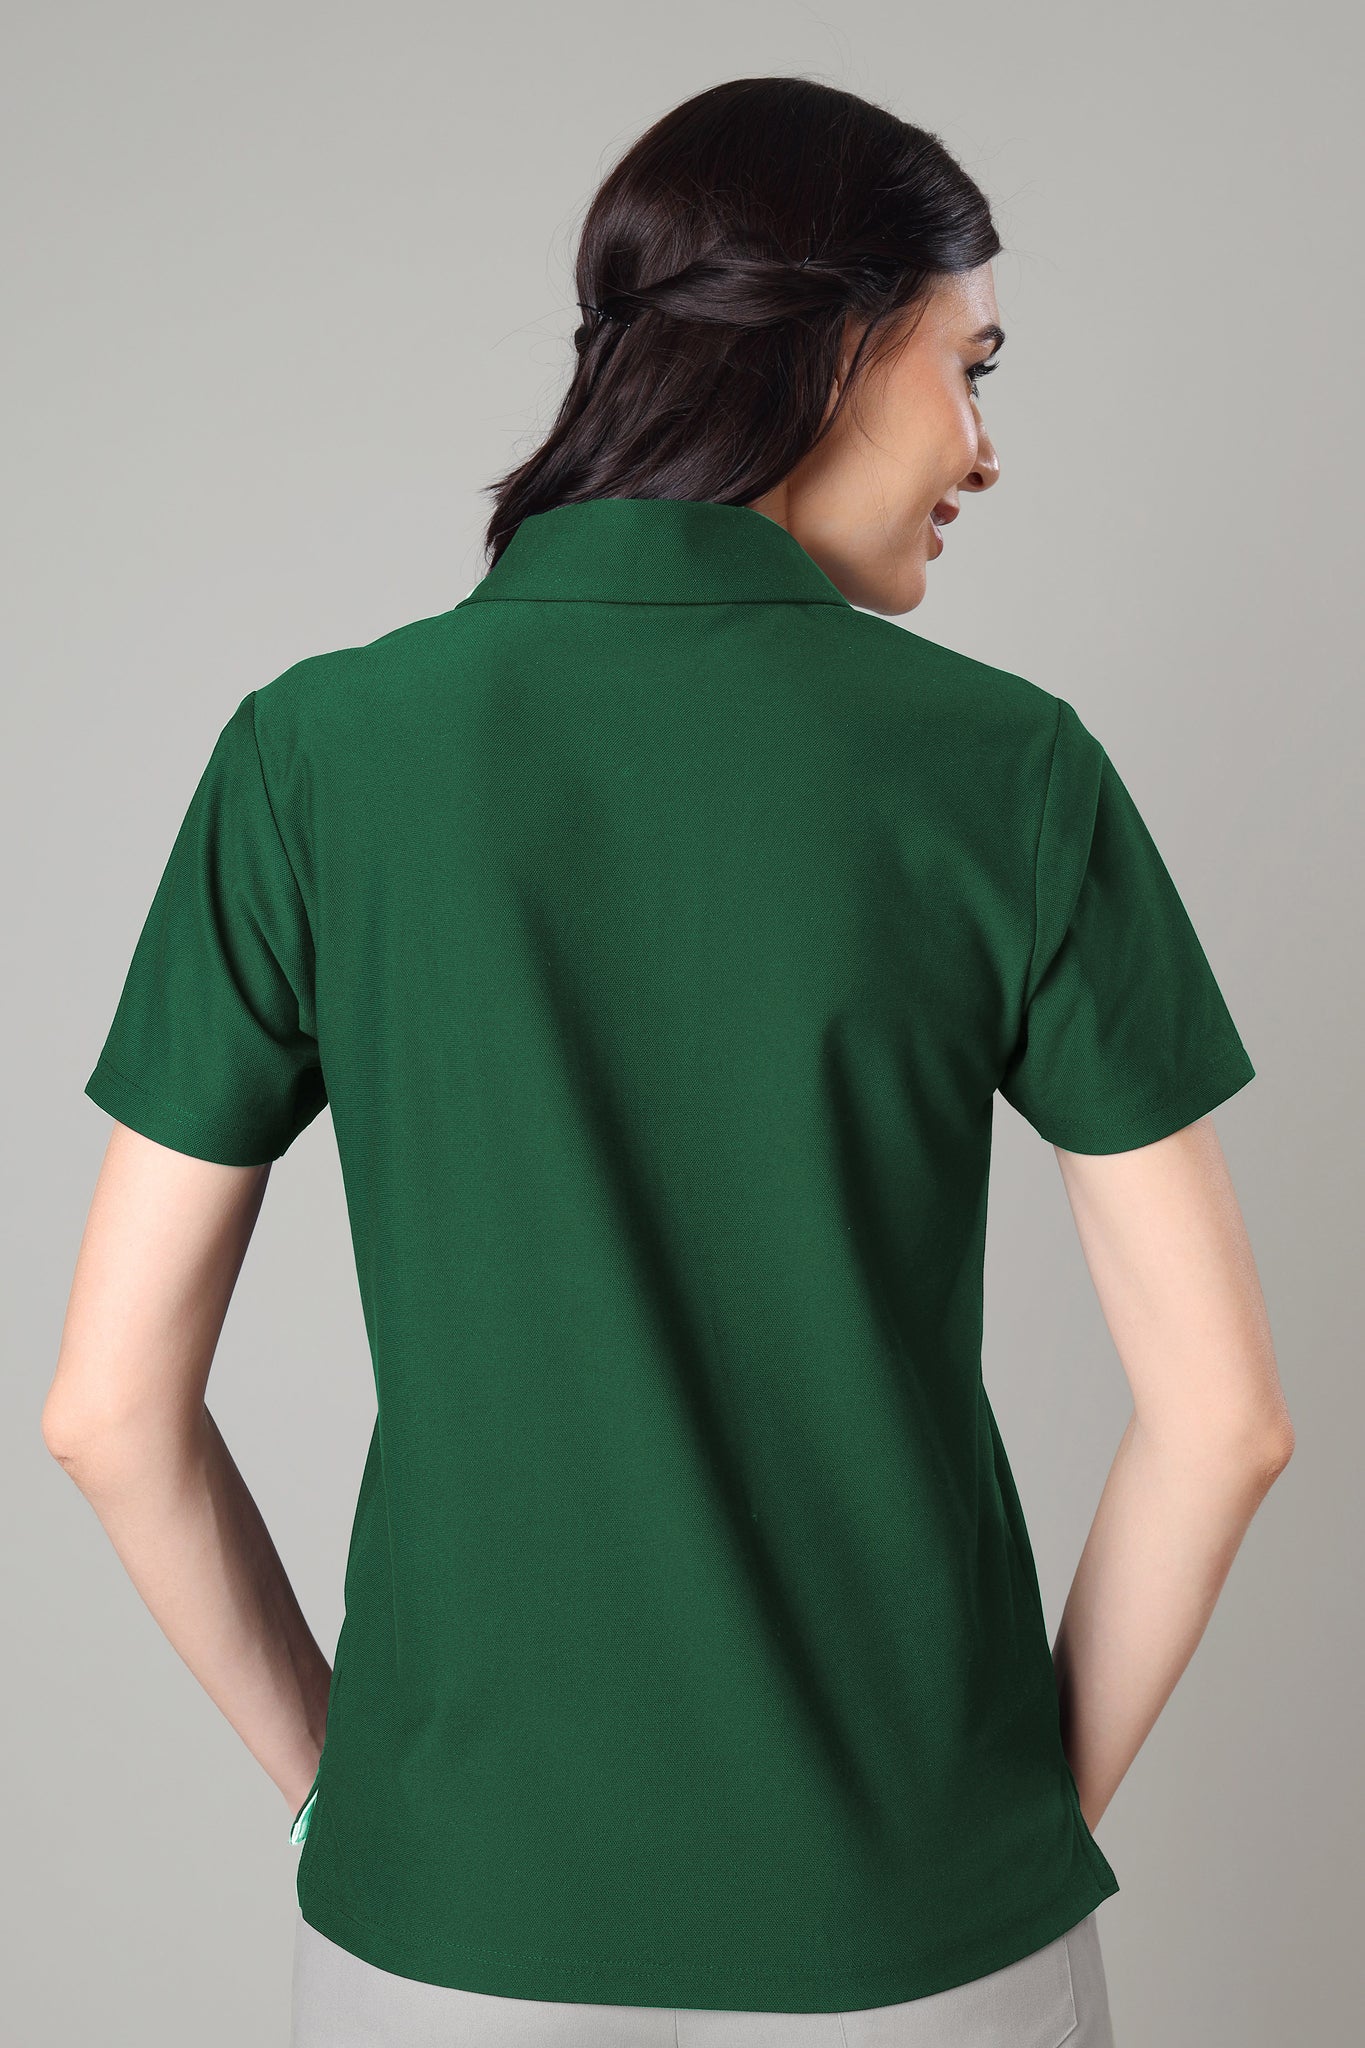 Exclusive Green Polo T-Shirt For Women